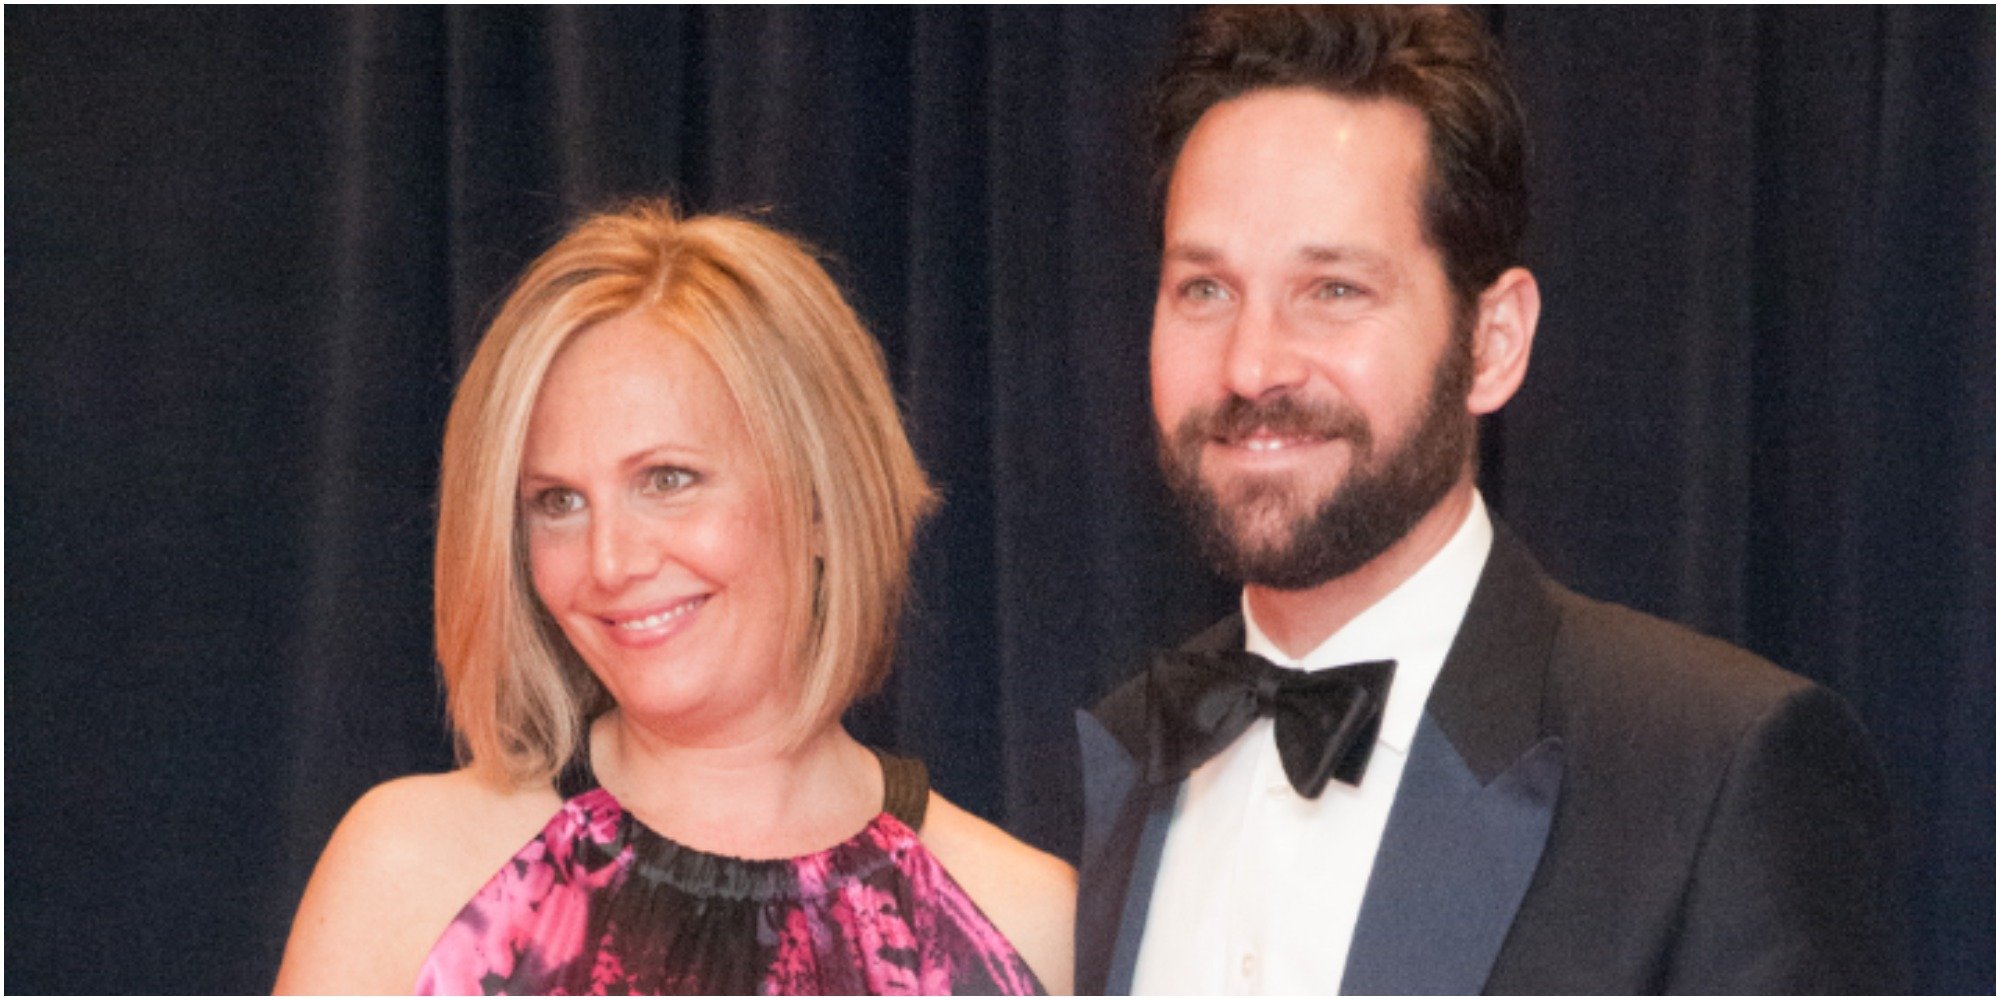 Paul Rudd and wife Julie Yaeger pose on the red carpet.